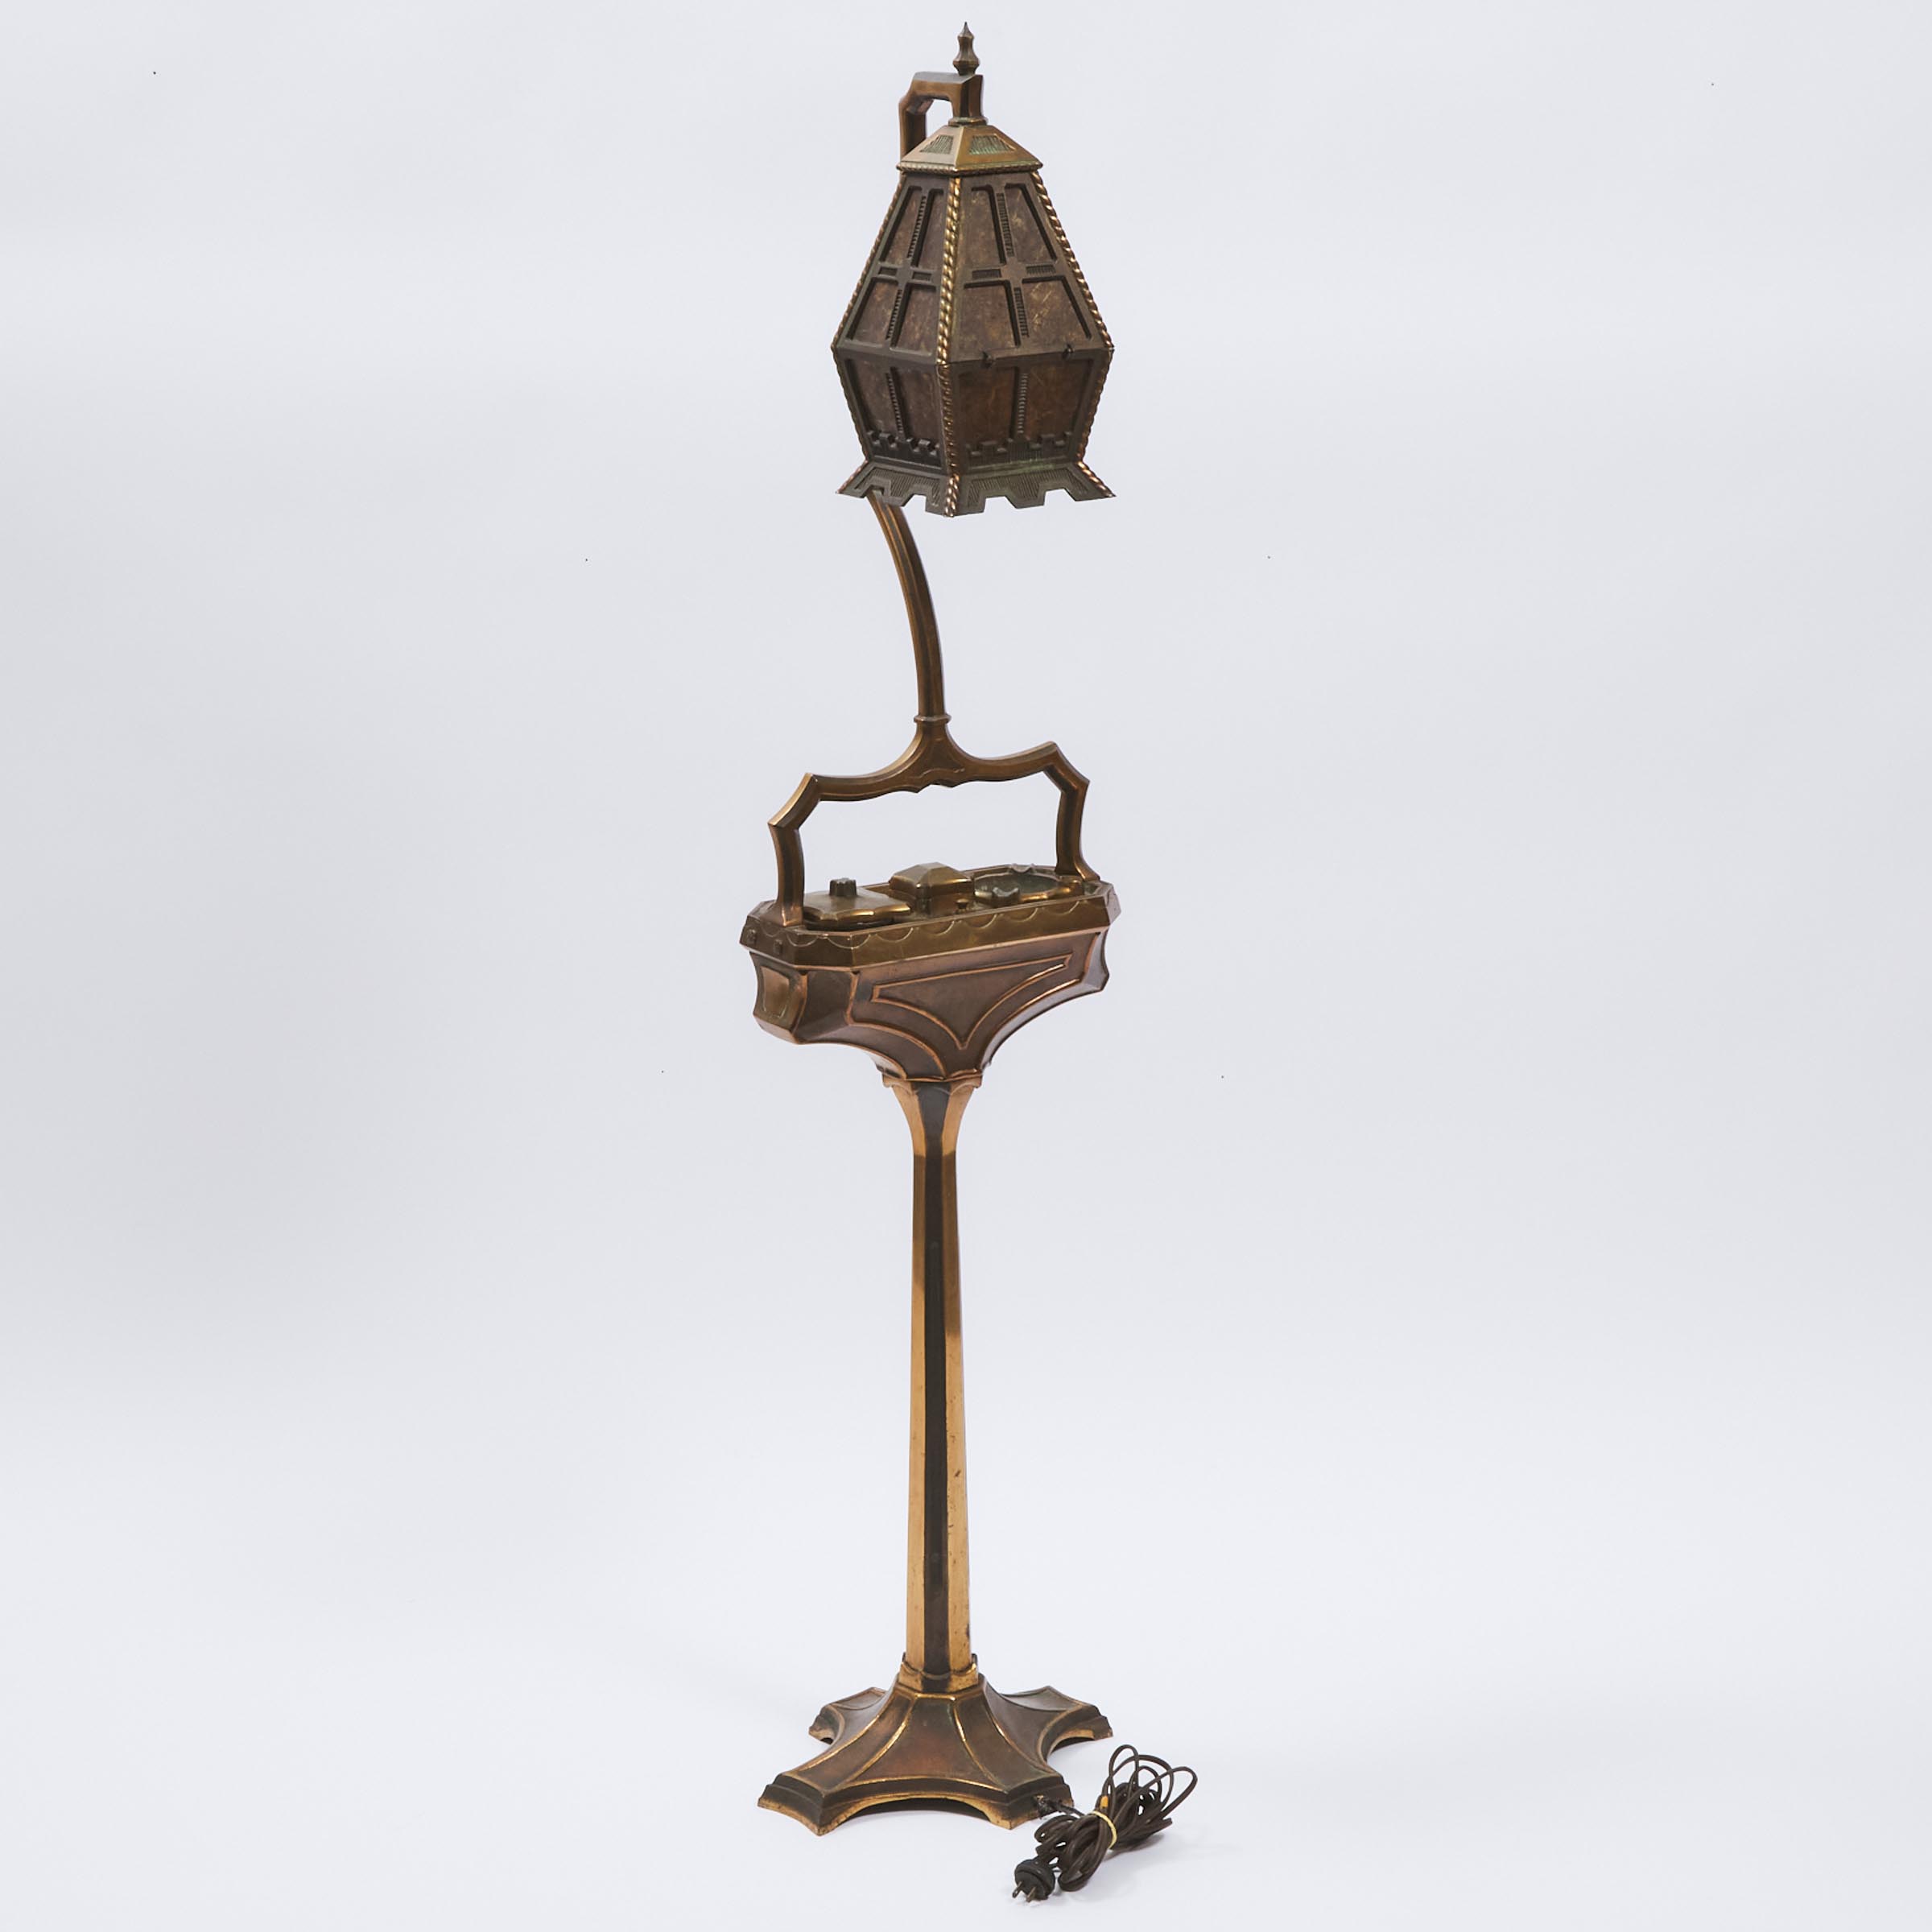 American Coppered Bronze Patented Reading Floor Lamp by Brady Lite, Detroit, Michigan, early 20th century